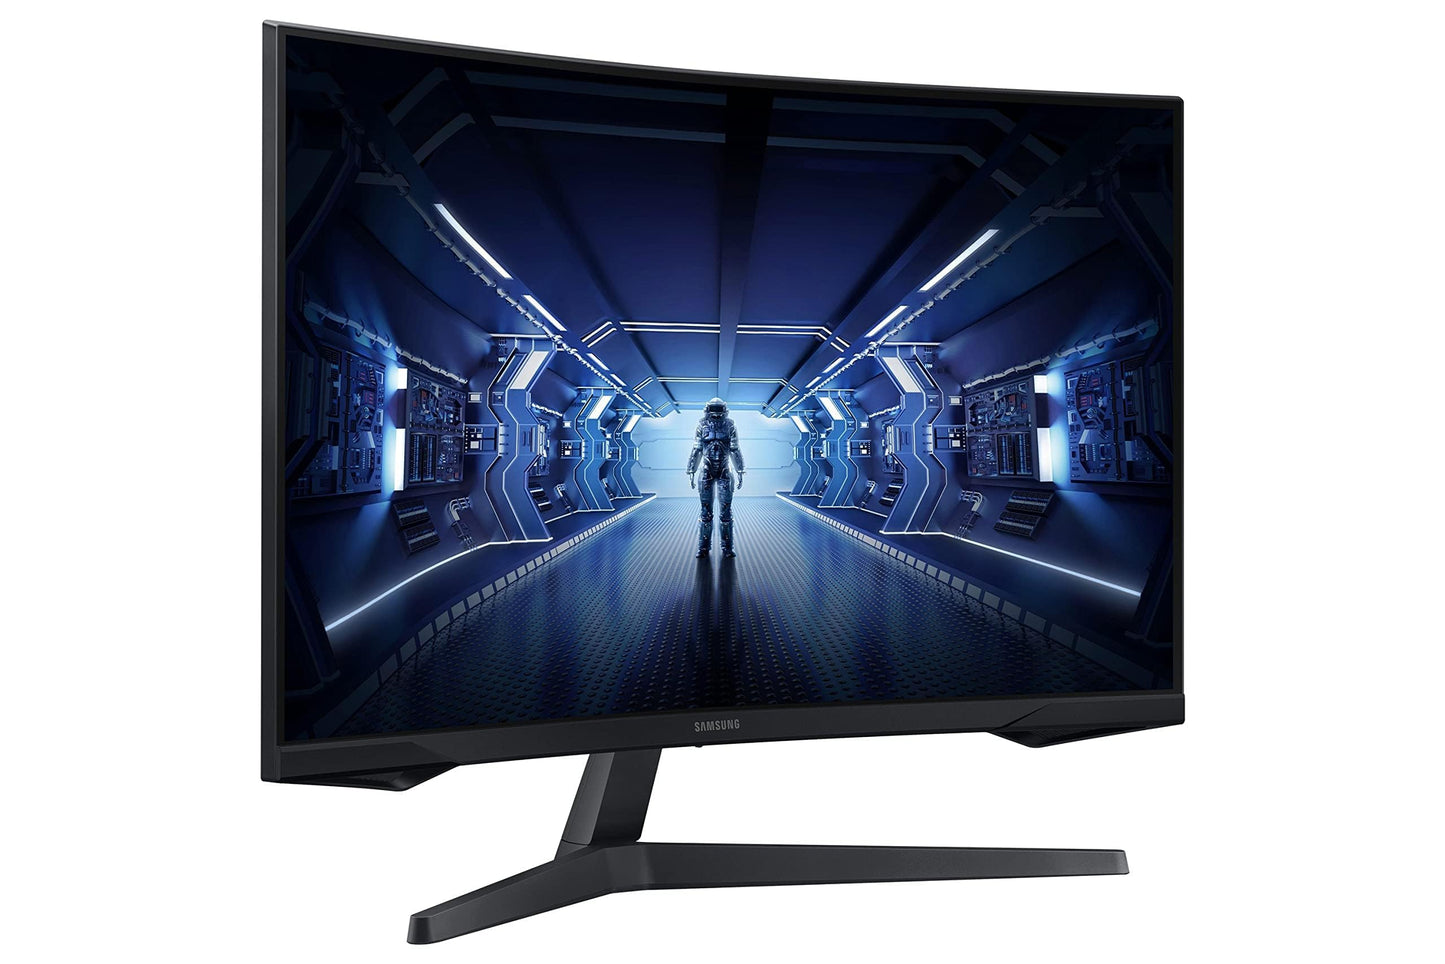 Samsung 32" LC32G55 Odyssey G5 Curved Gaming Monitor with 144Hz Refresh Rate & 1ms Response Time, WQHD Resolution, AMD FreeSync Premium - LC32G55TQBMXUE